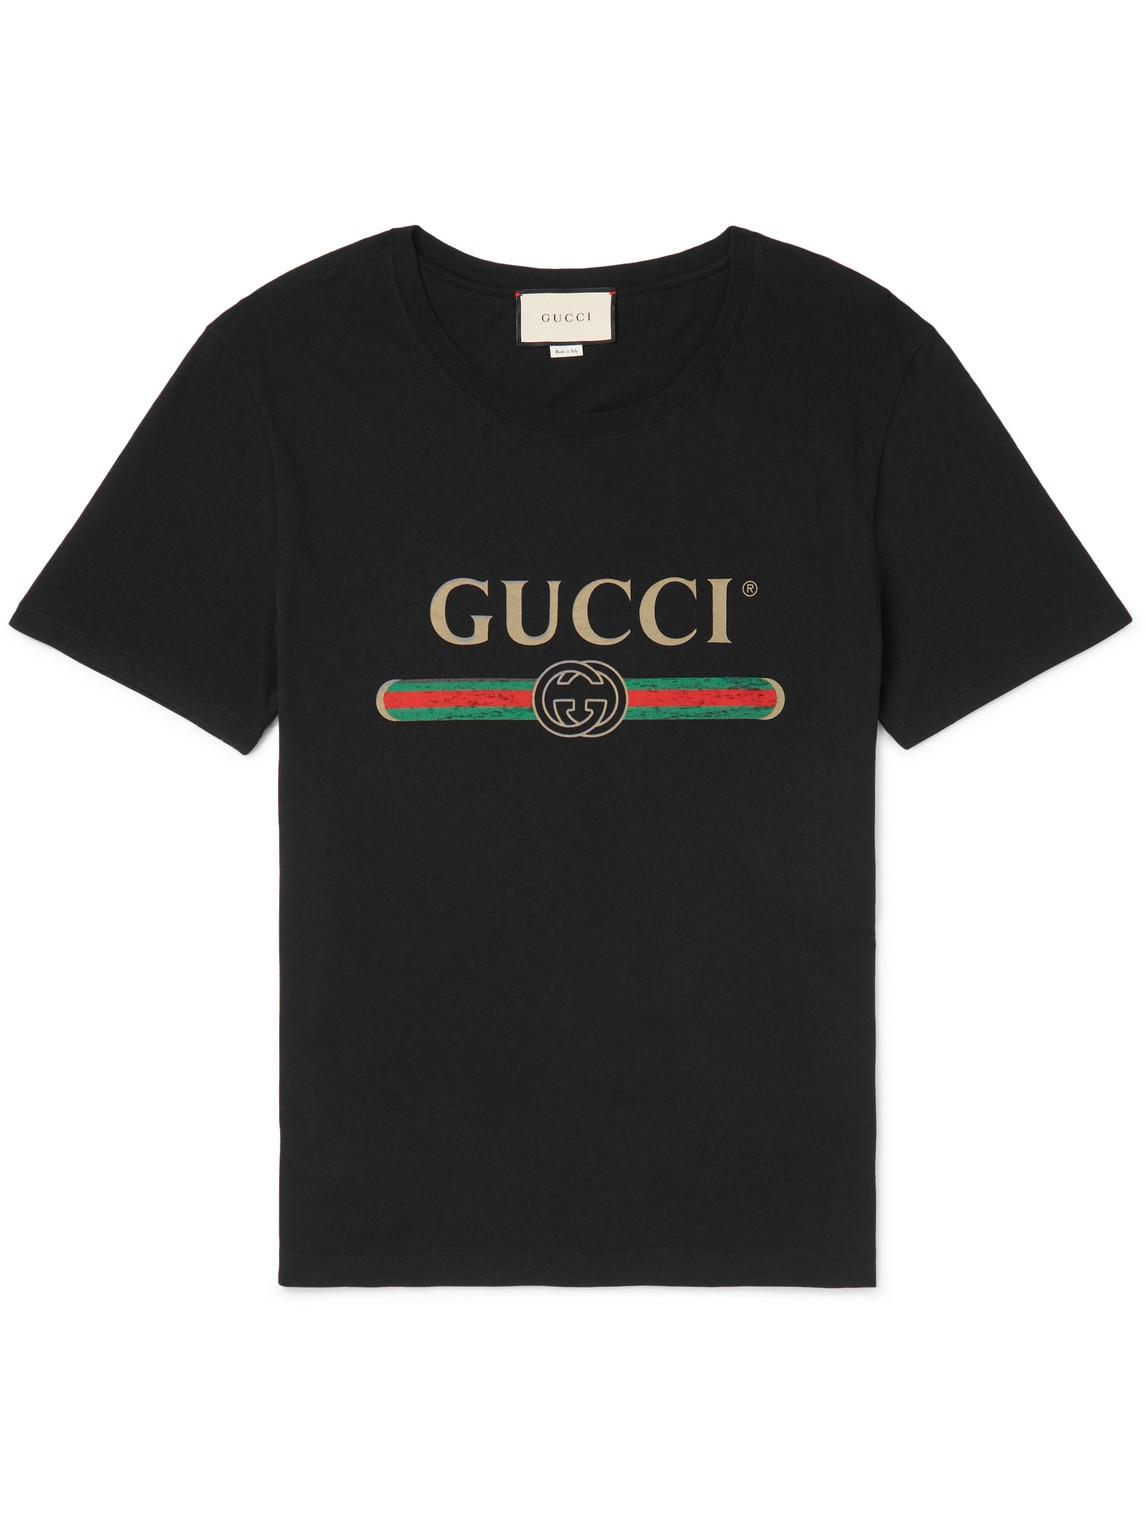 Gucci Cotton Distressed Fake Logo T Shirt in Black for Men - Save 32% - Lyst